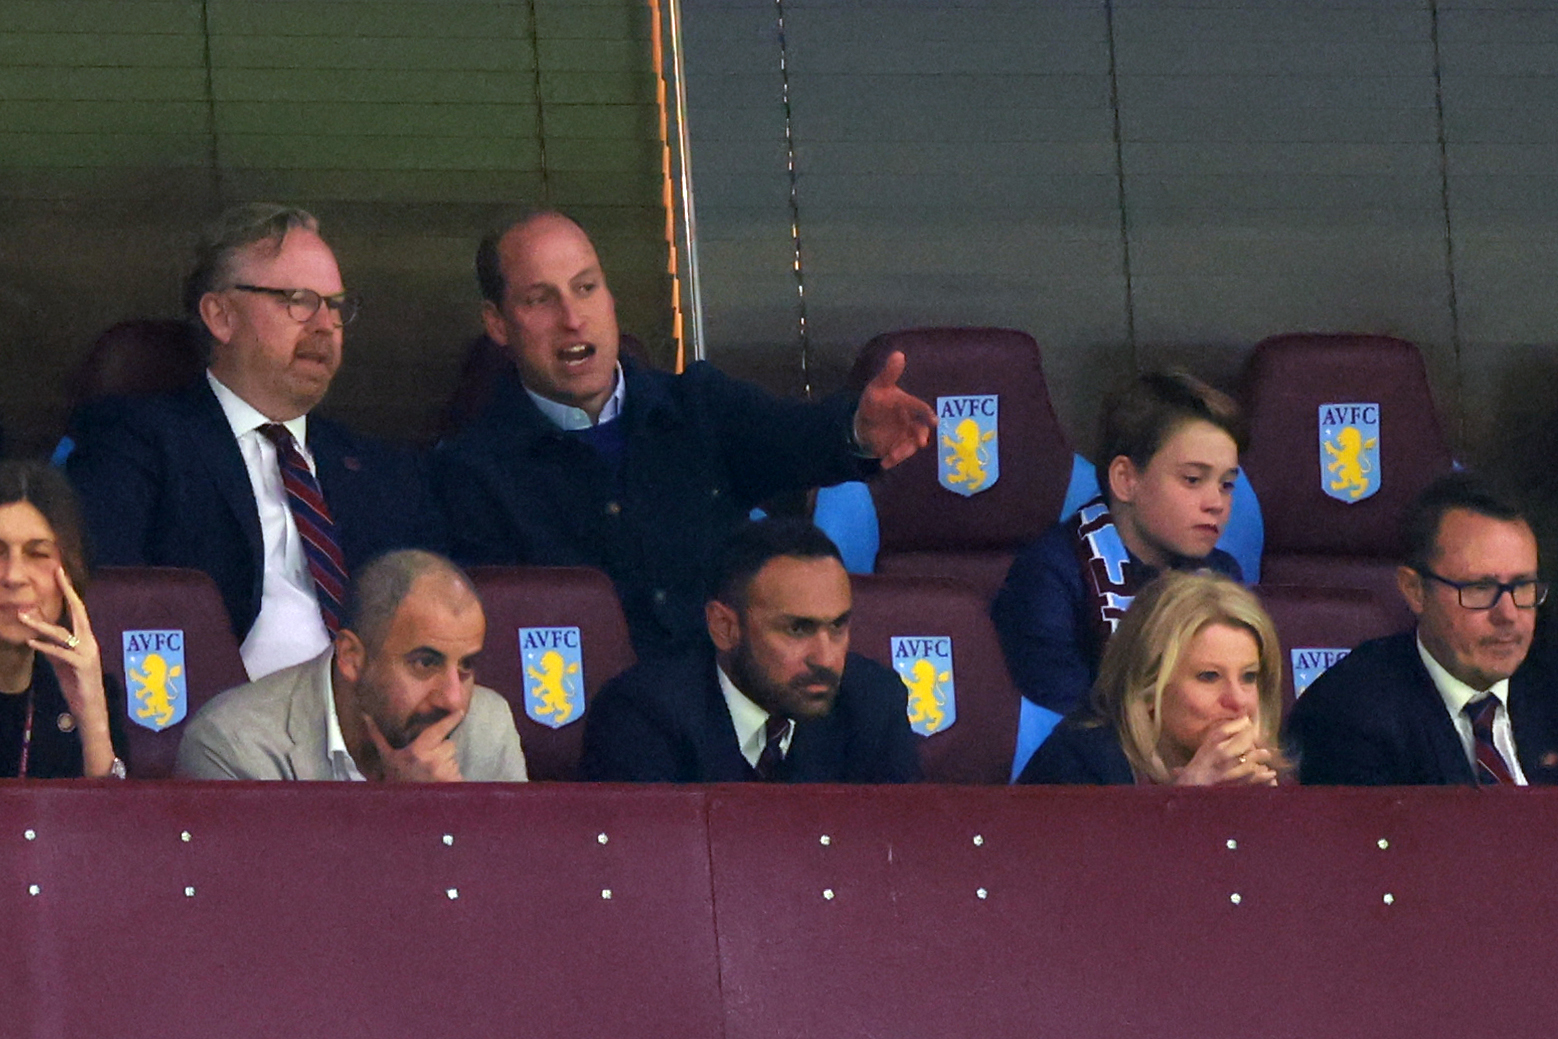 Prince William and Prince George at the Aston Villa and Lille OSC match in Birmingham, England on April 11, 2024 | Source: Getty Images